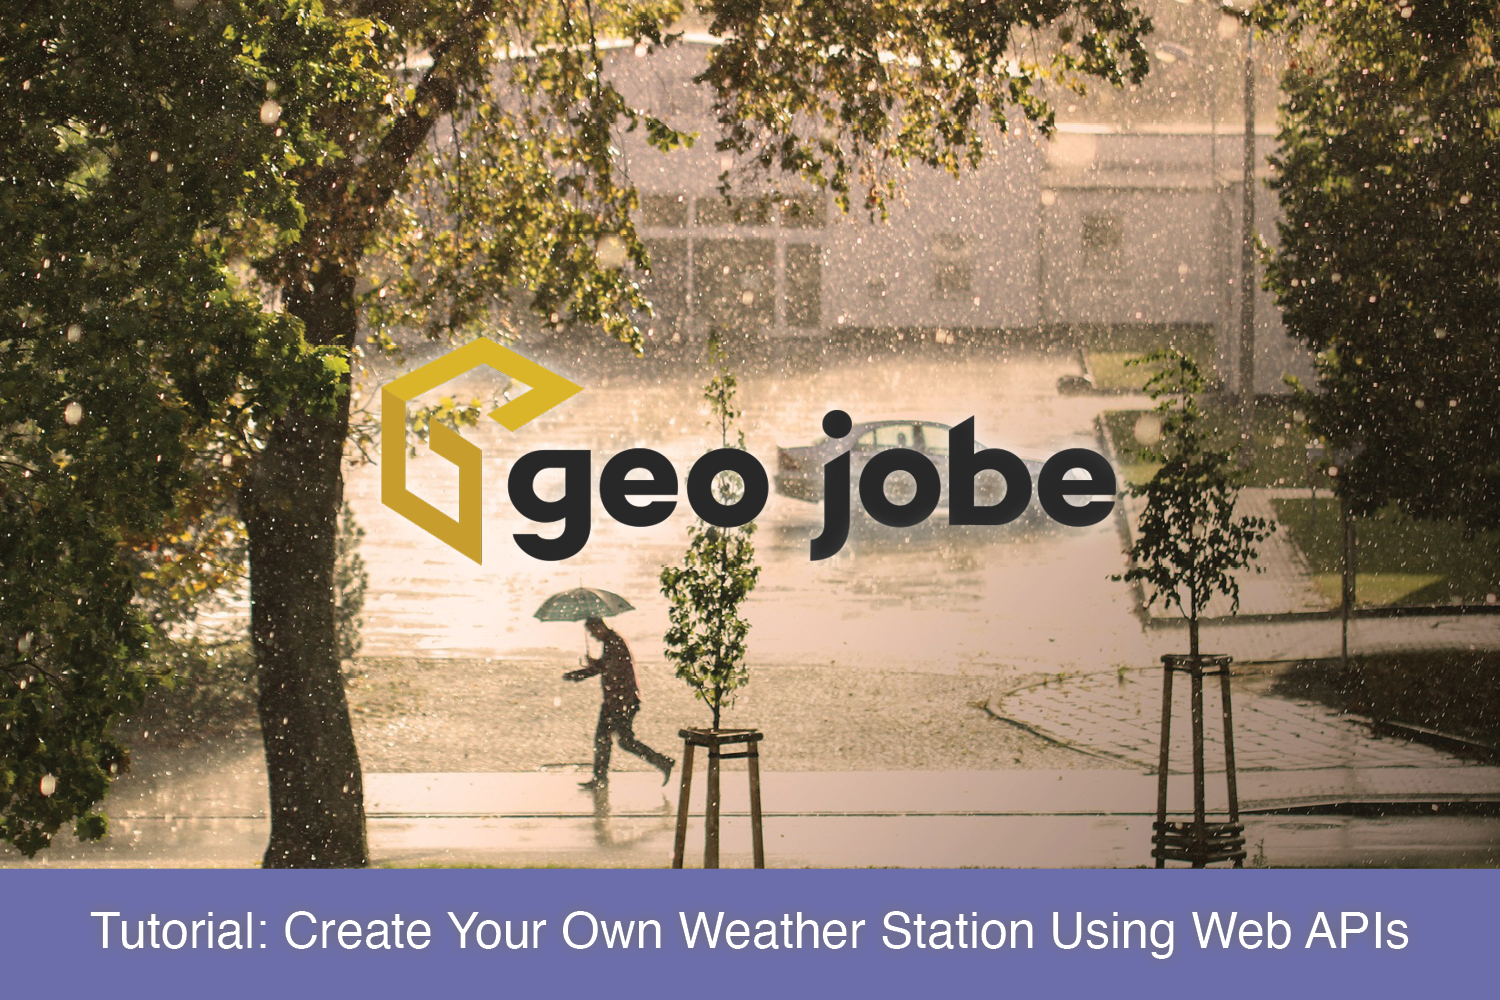 Tutorial: Create Your Own Weather Station Using Web APIs